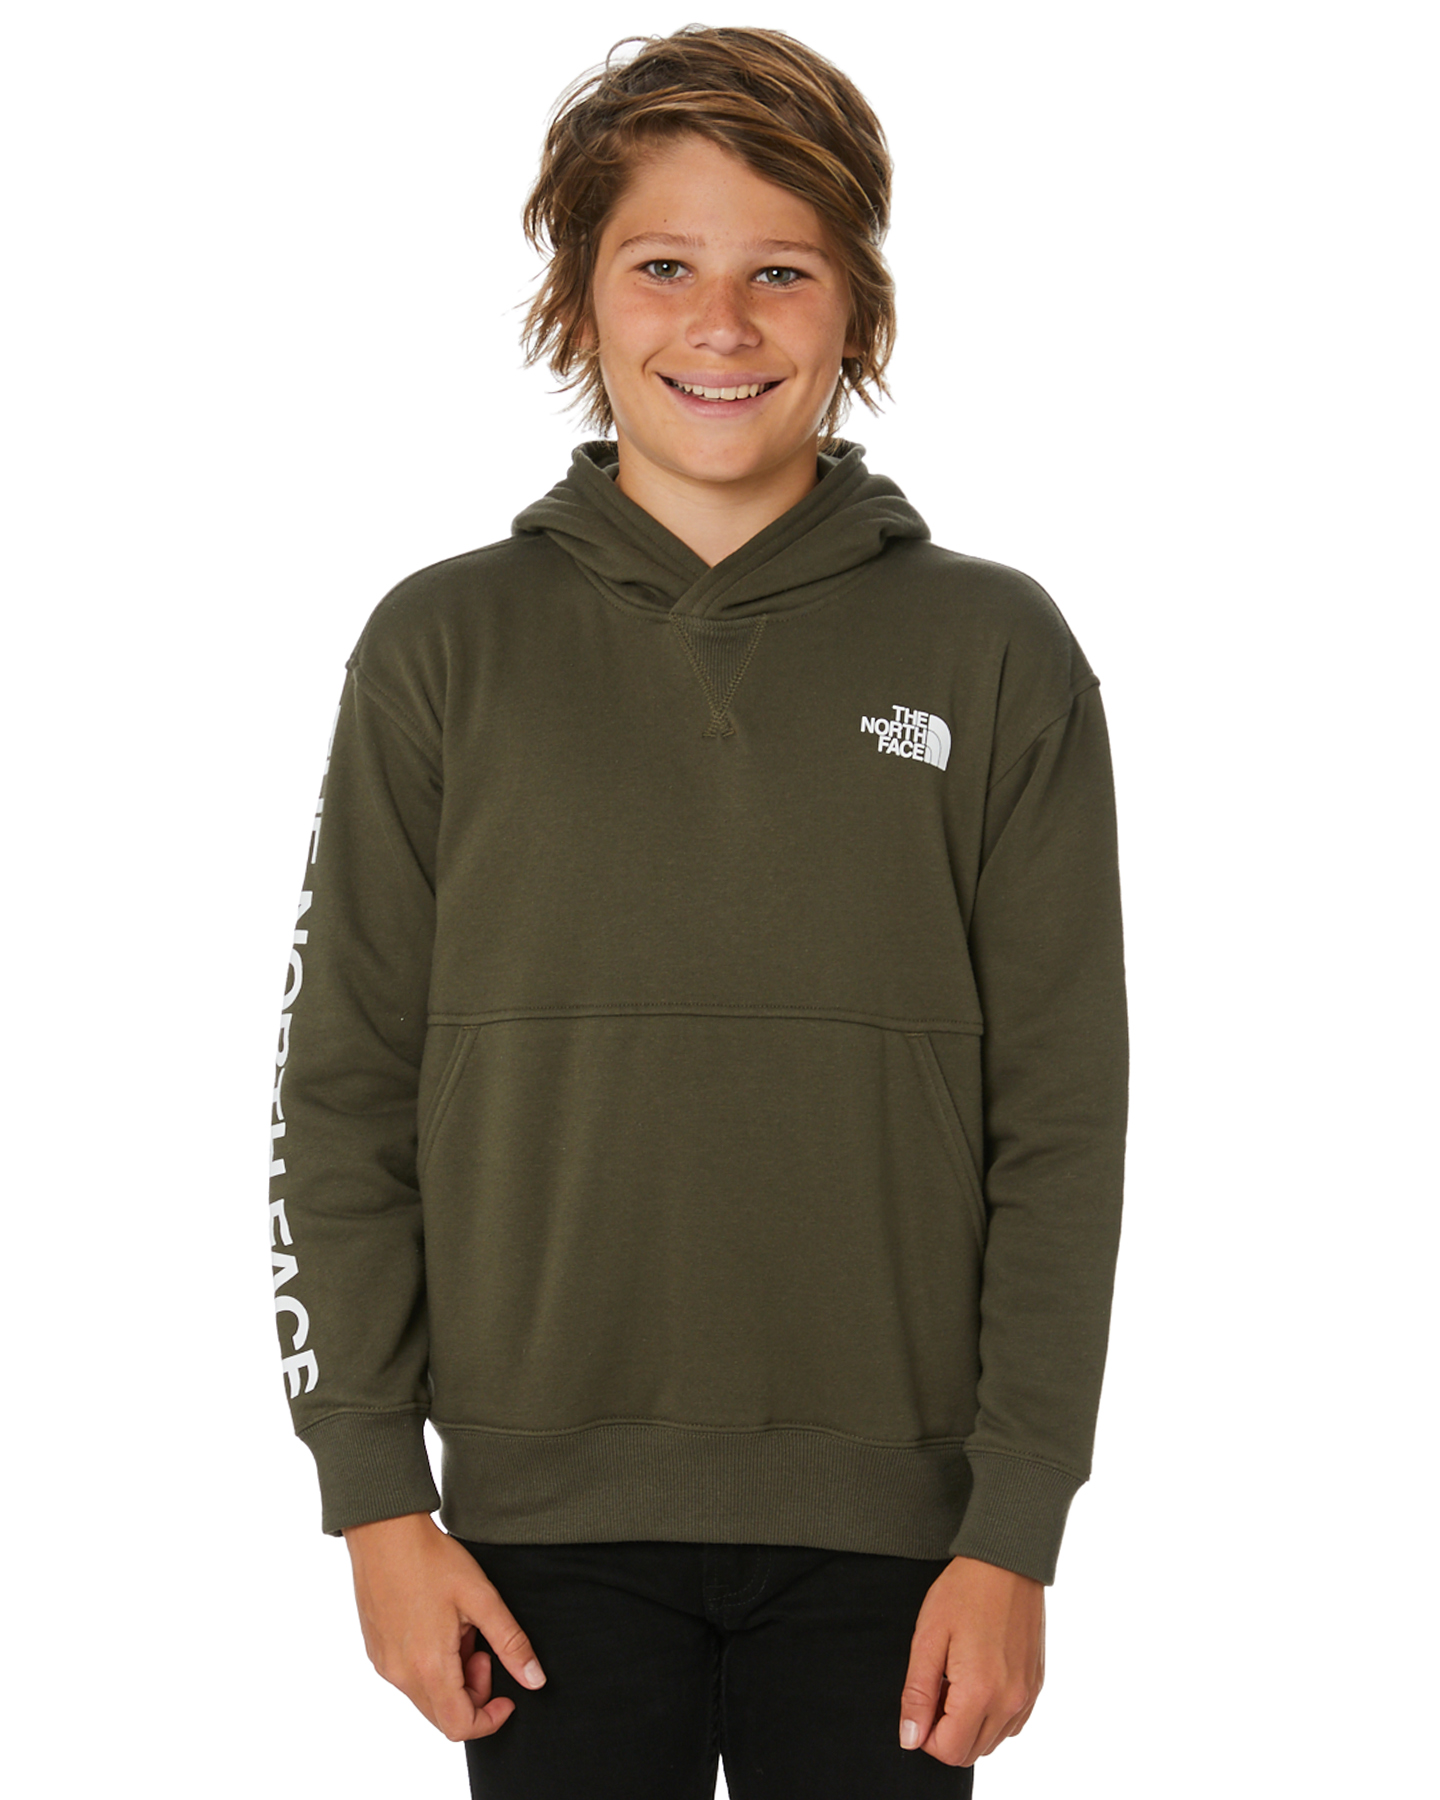 kids north face jumpers